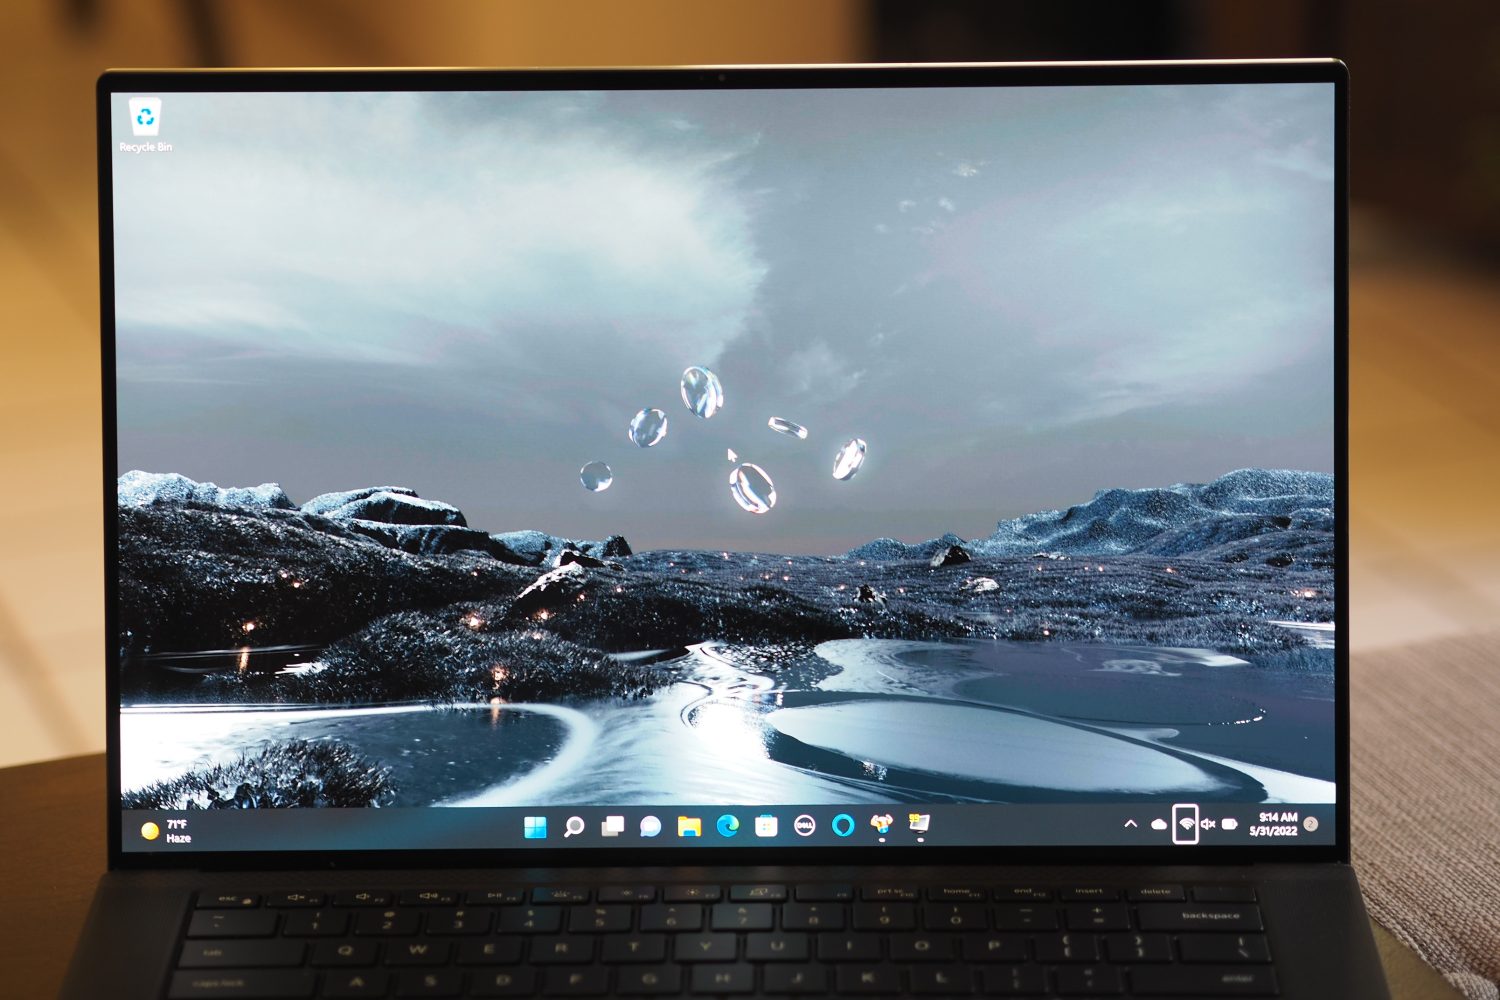 Dell XPS 15 (late 2021) review: Big screen, not so many thrills